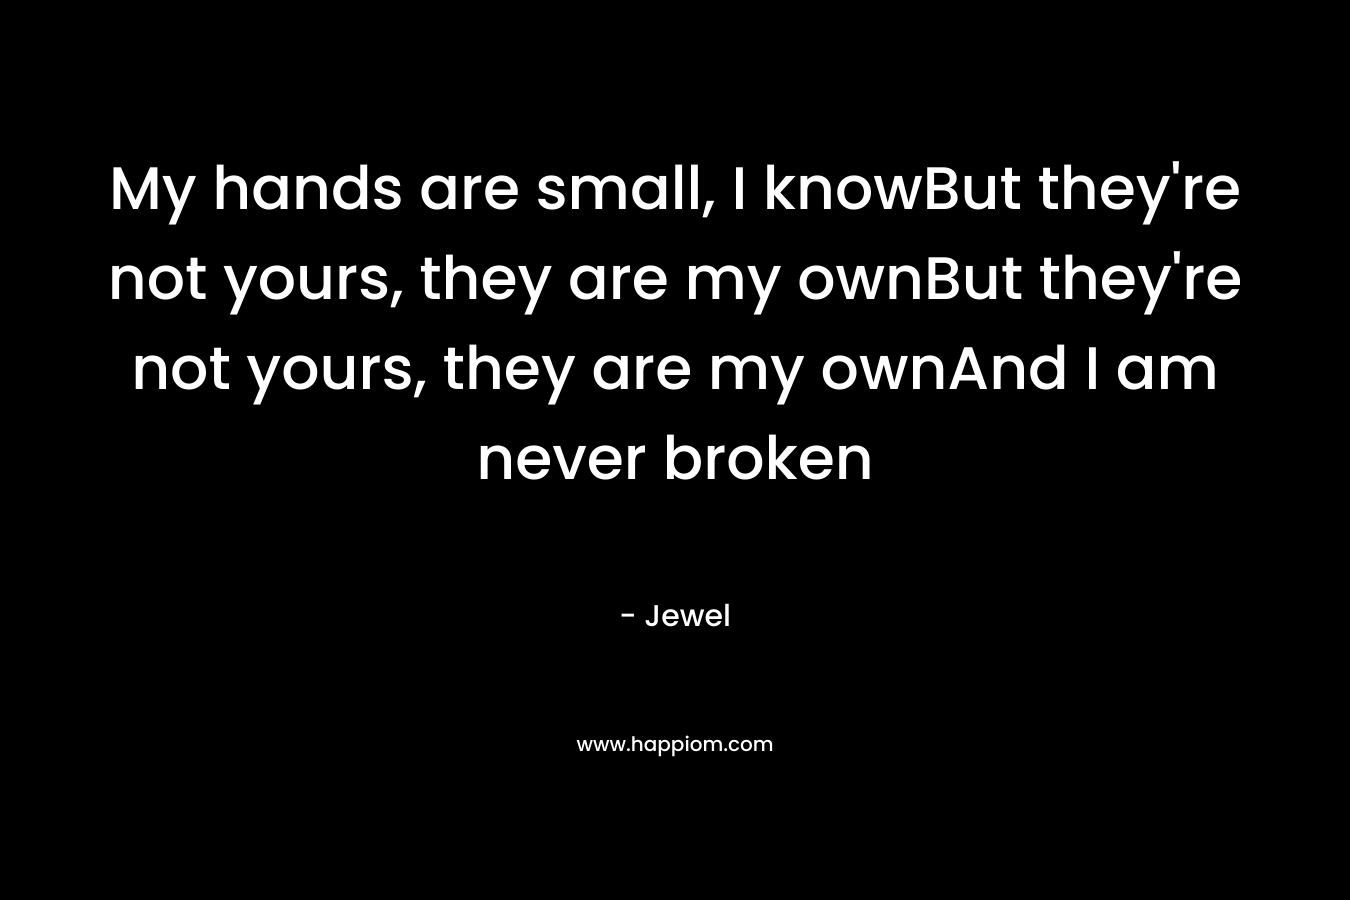 My hands are small, I knowBut they’re not yours, they are my ownBut they’re not yours, they are my ownAnd I am never broken – Jewel